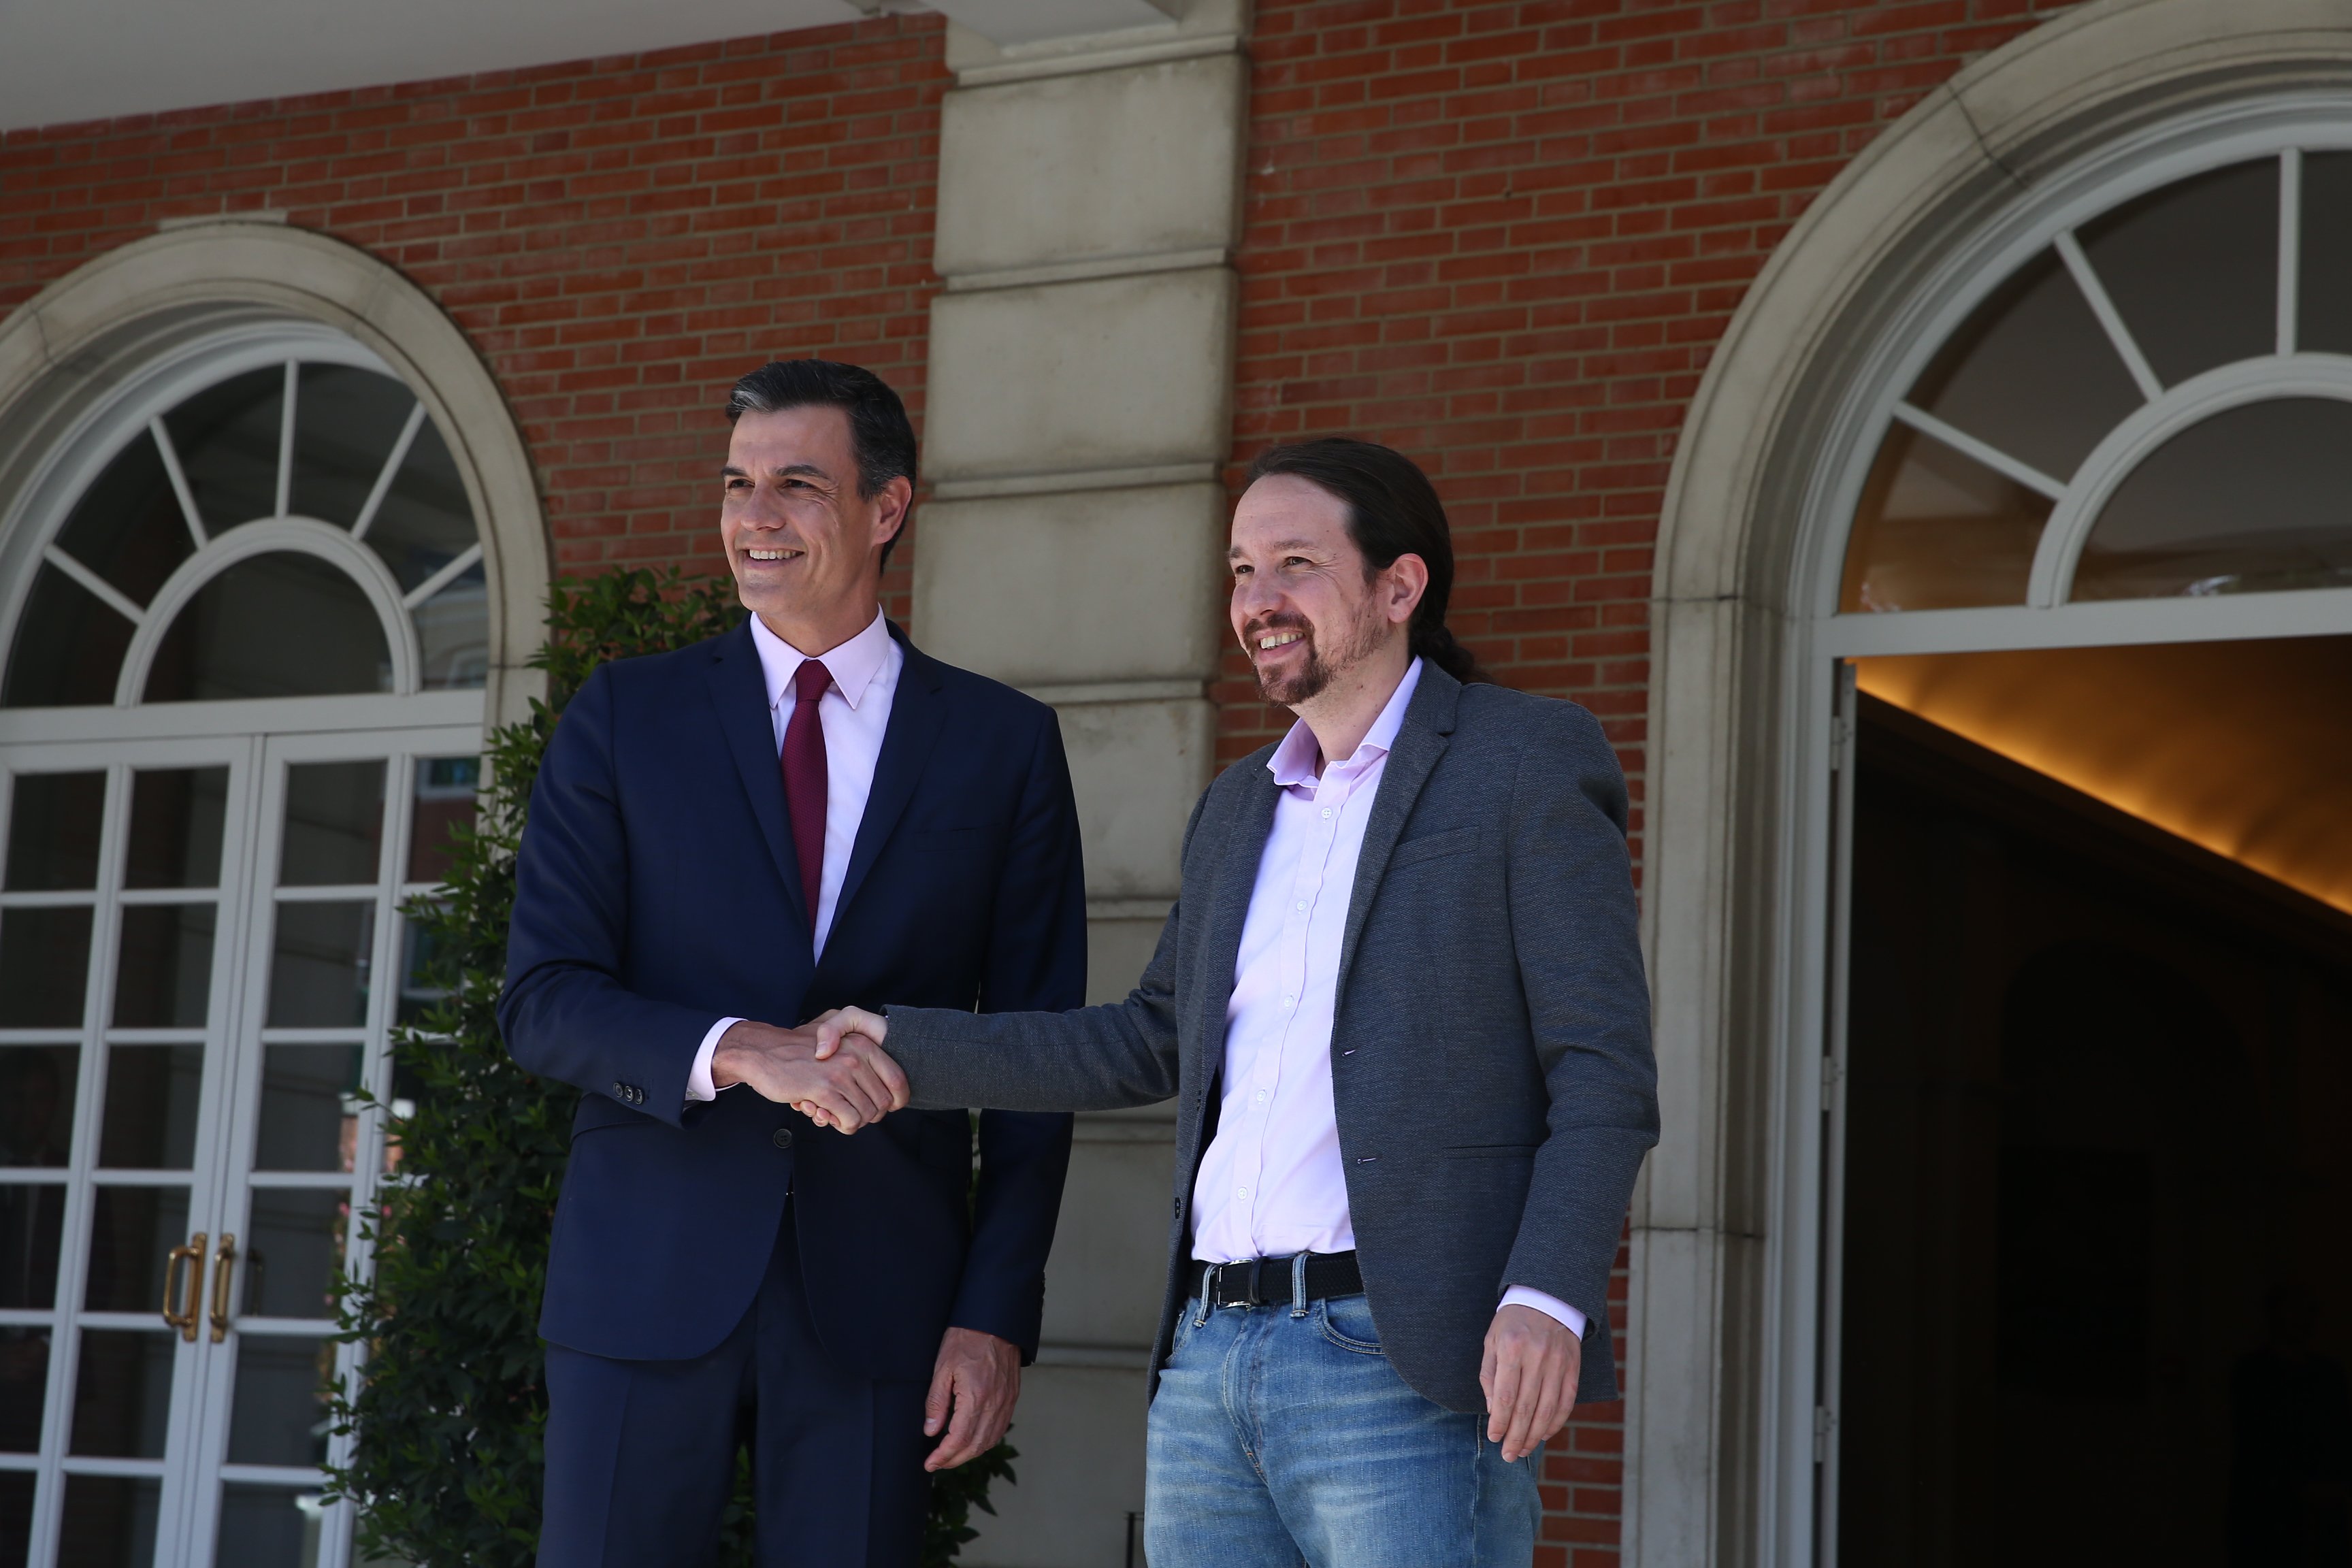 No mention of Catalan conflict resolution in Sánchez's programme negotiation with Iglesias